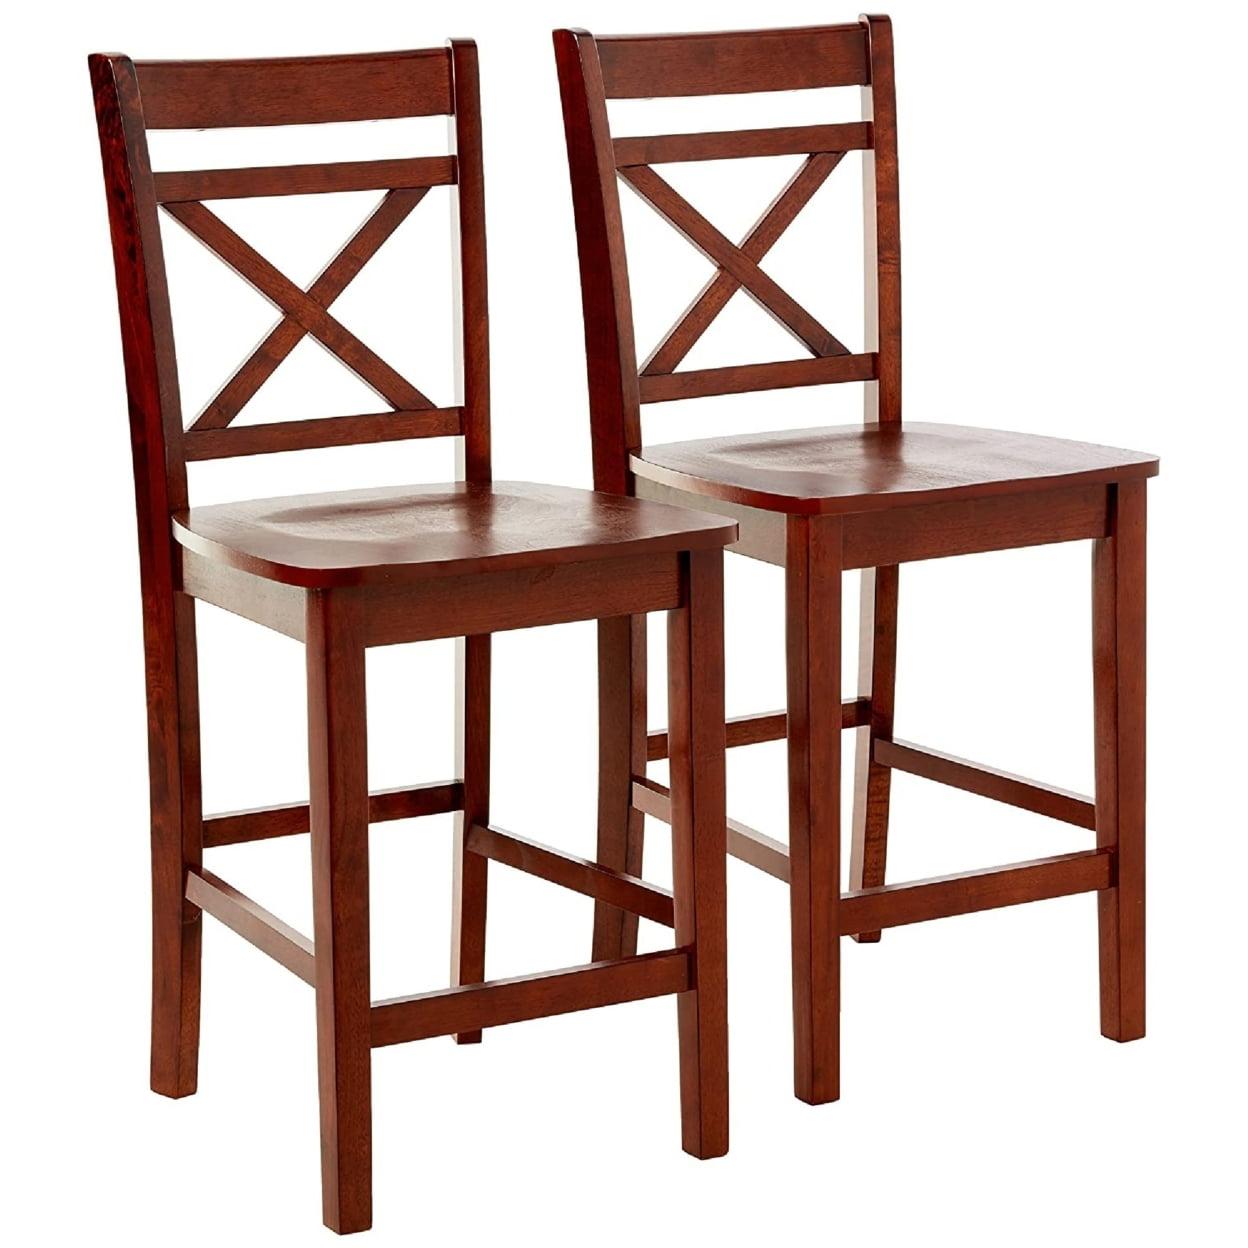 Set of 2 Cherry Brown Wooden Counter Height Chairs with Cross Back